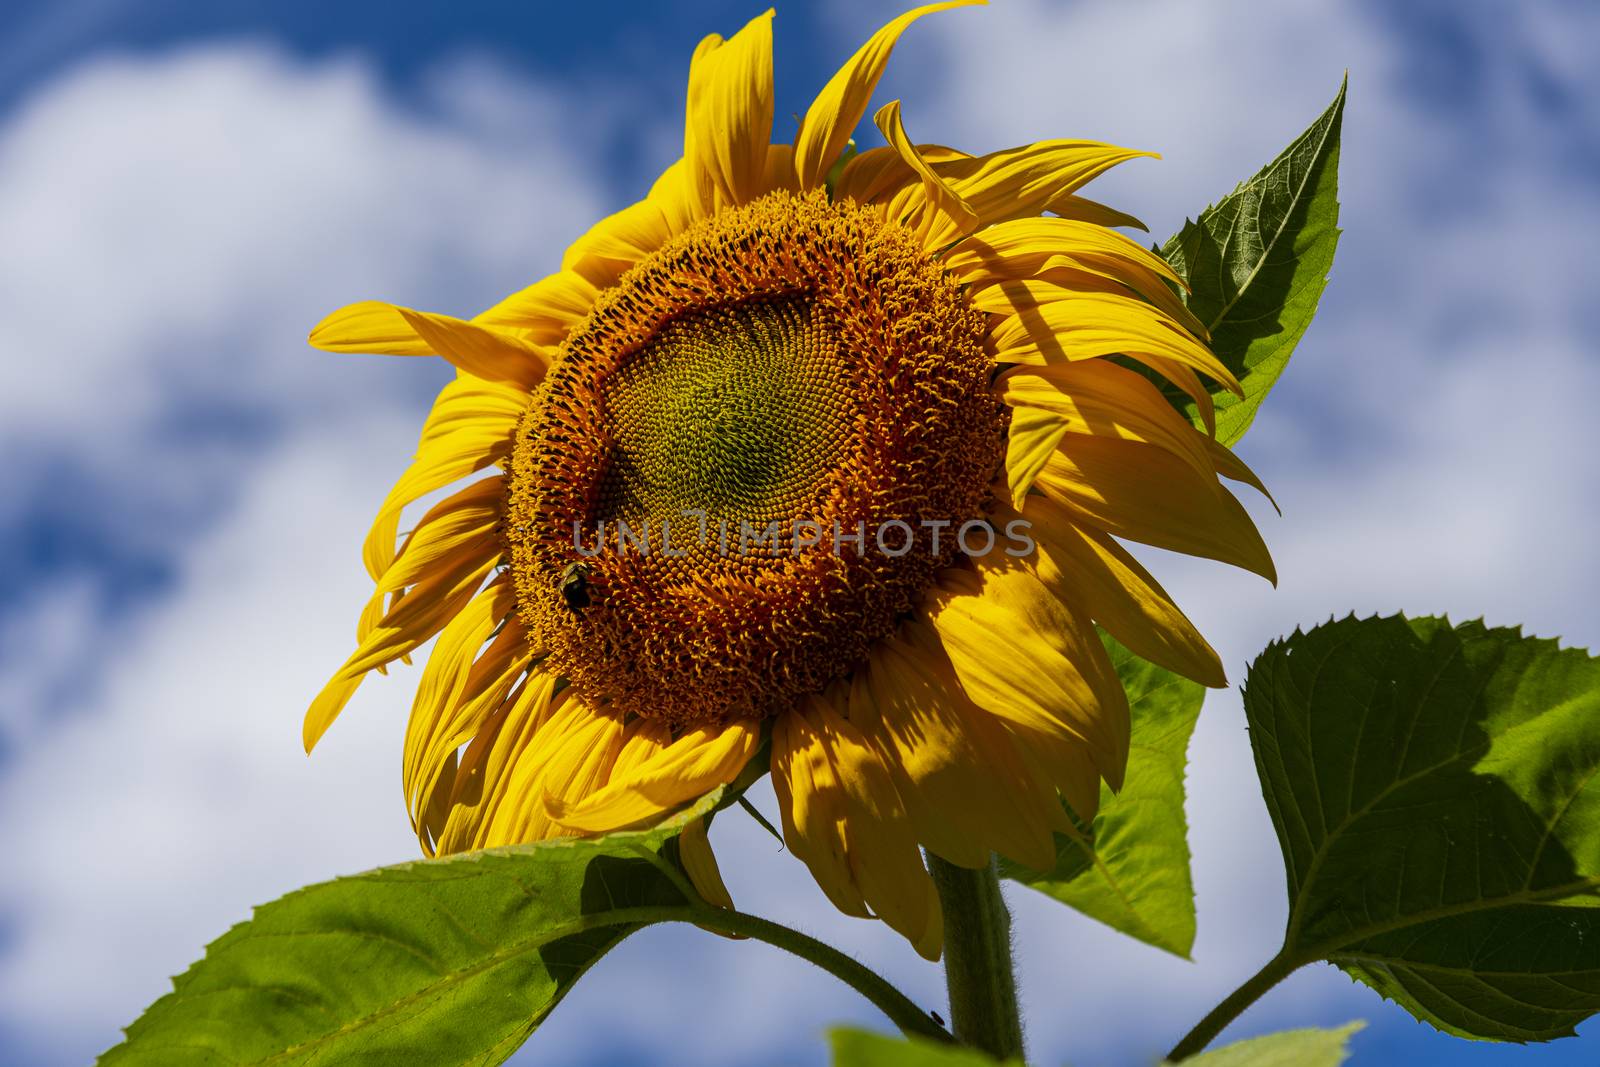 Bright yellow sunflower with green leaves against a blue sky by ben44